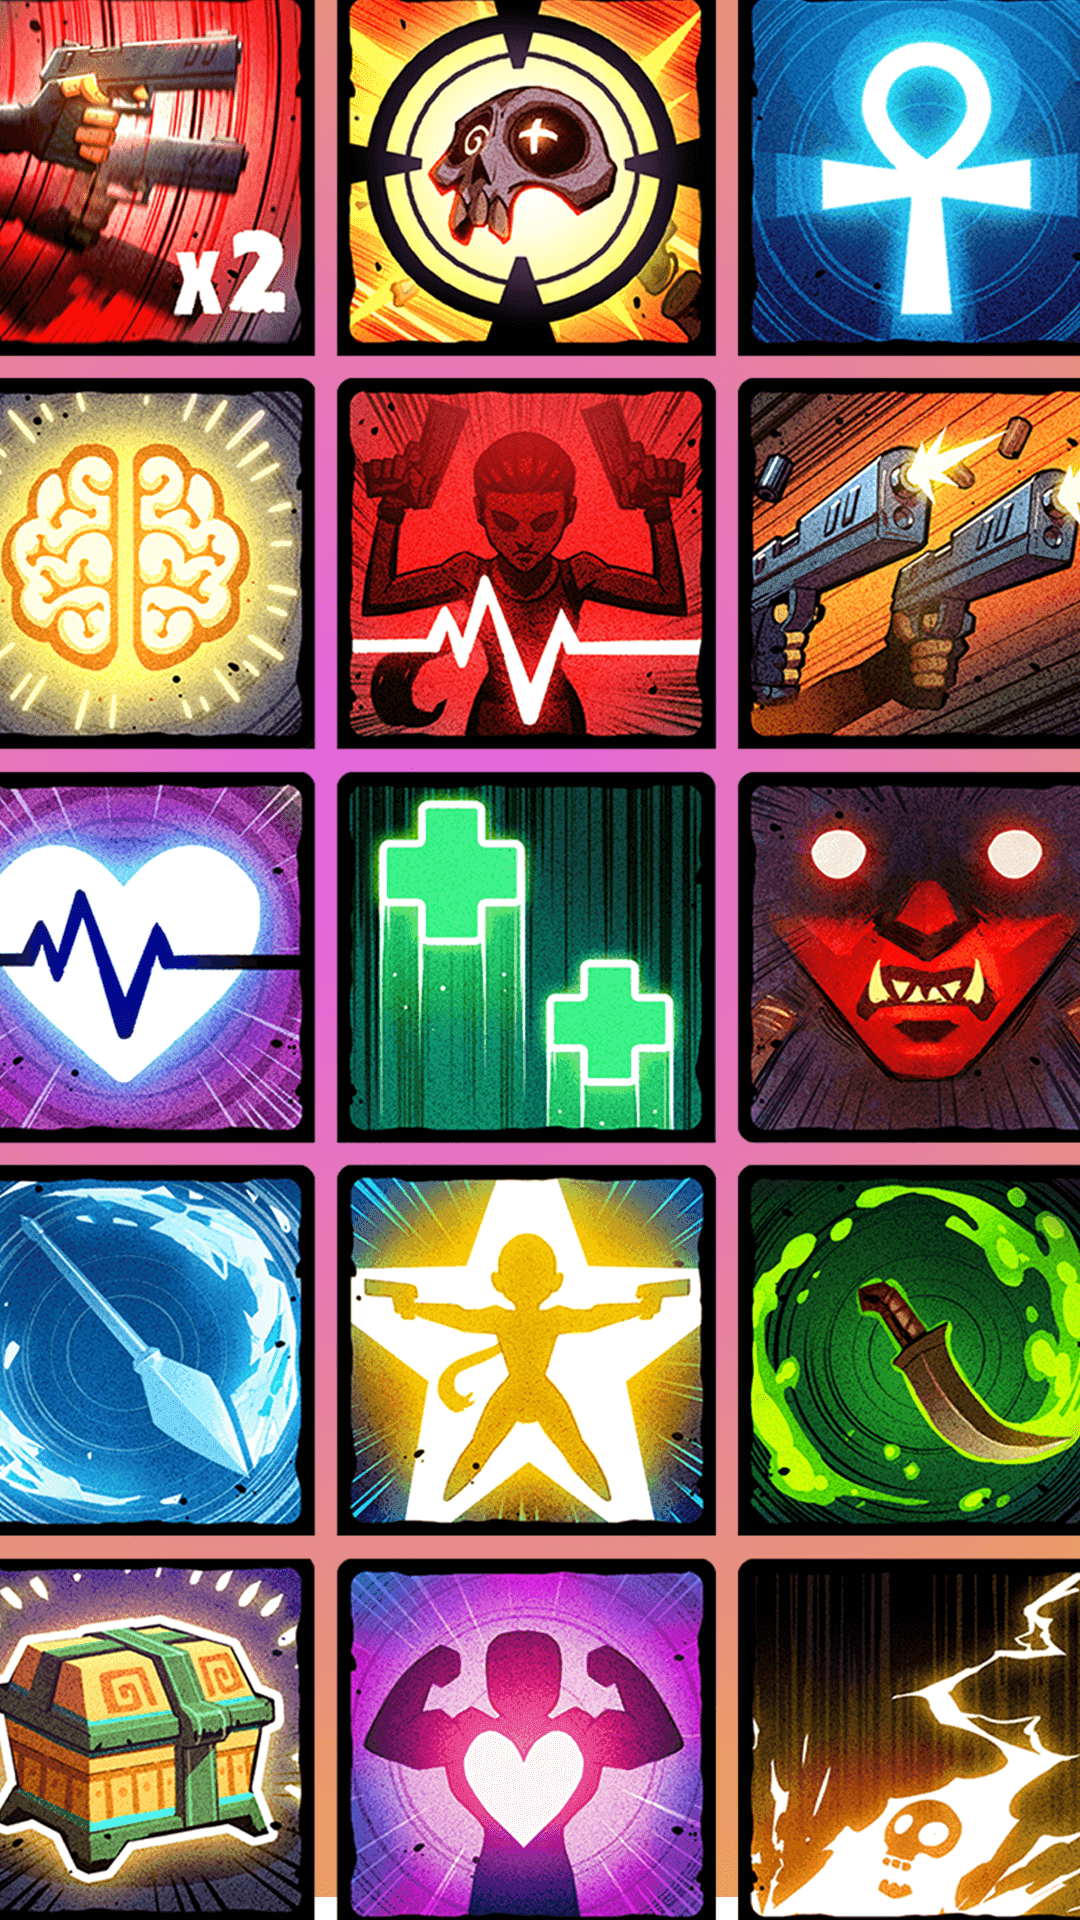 A collection of vibrant, illustrated icons representing various power-ups and abilities, each with unique symbols and colors.